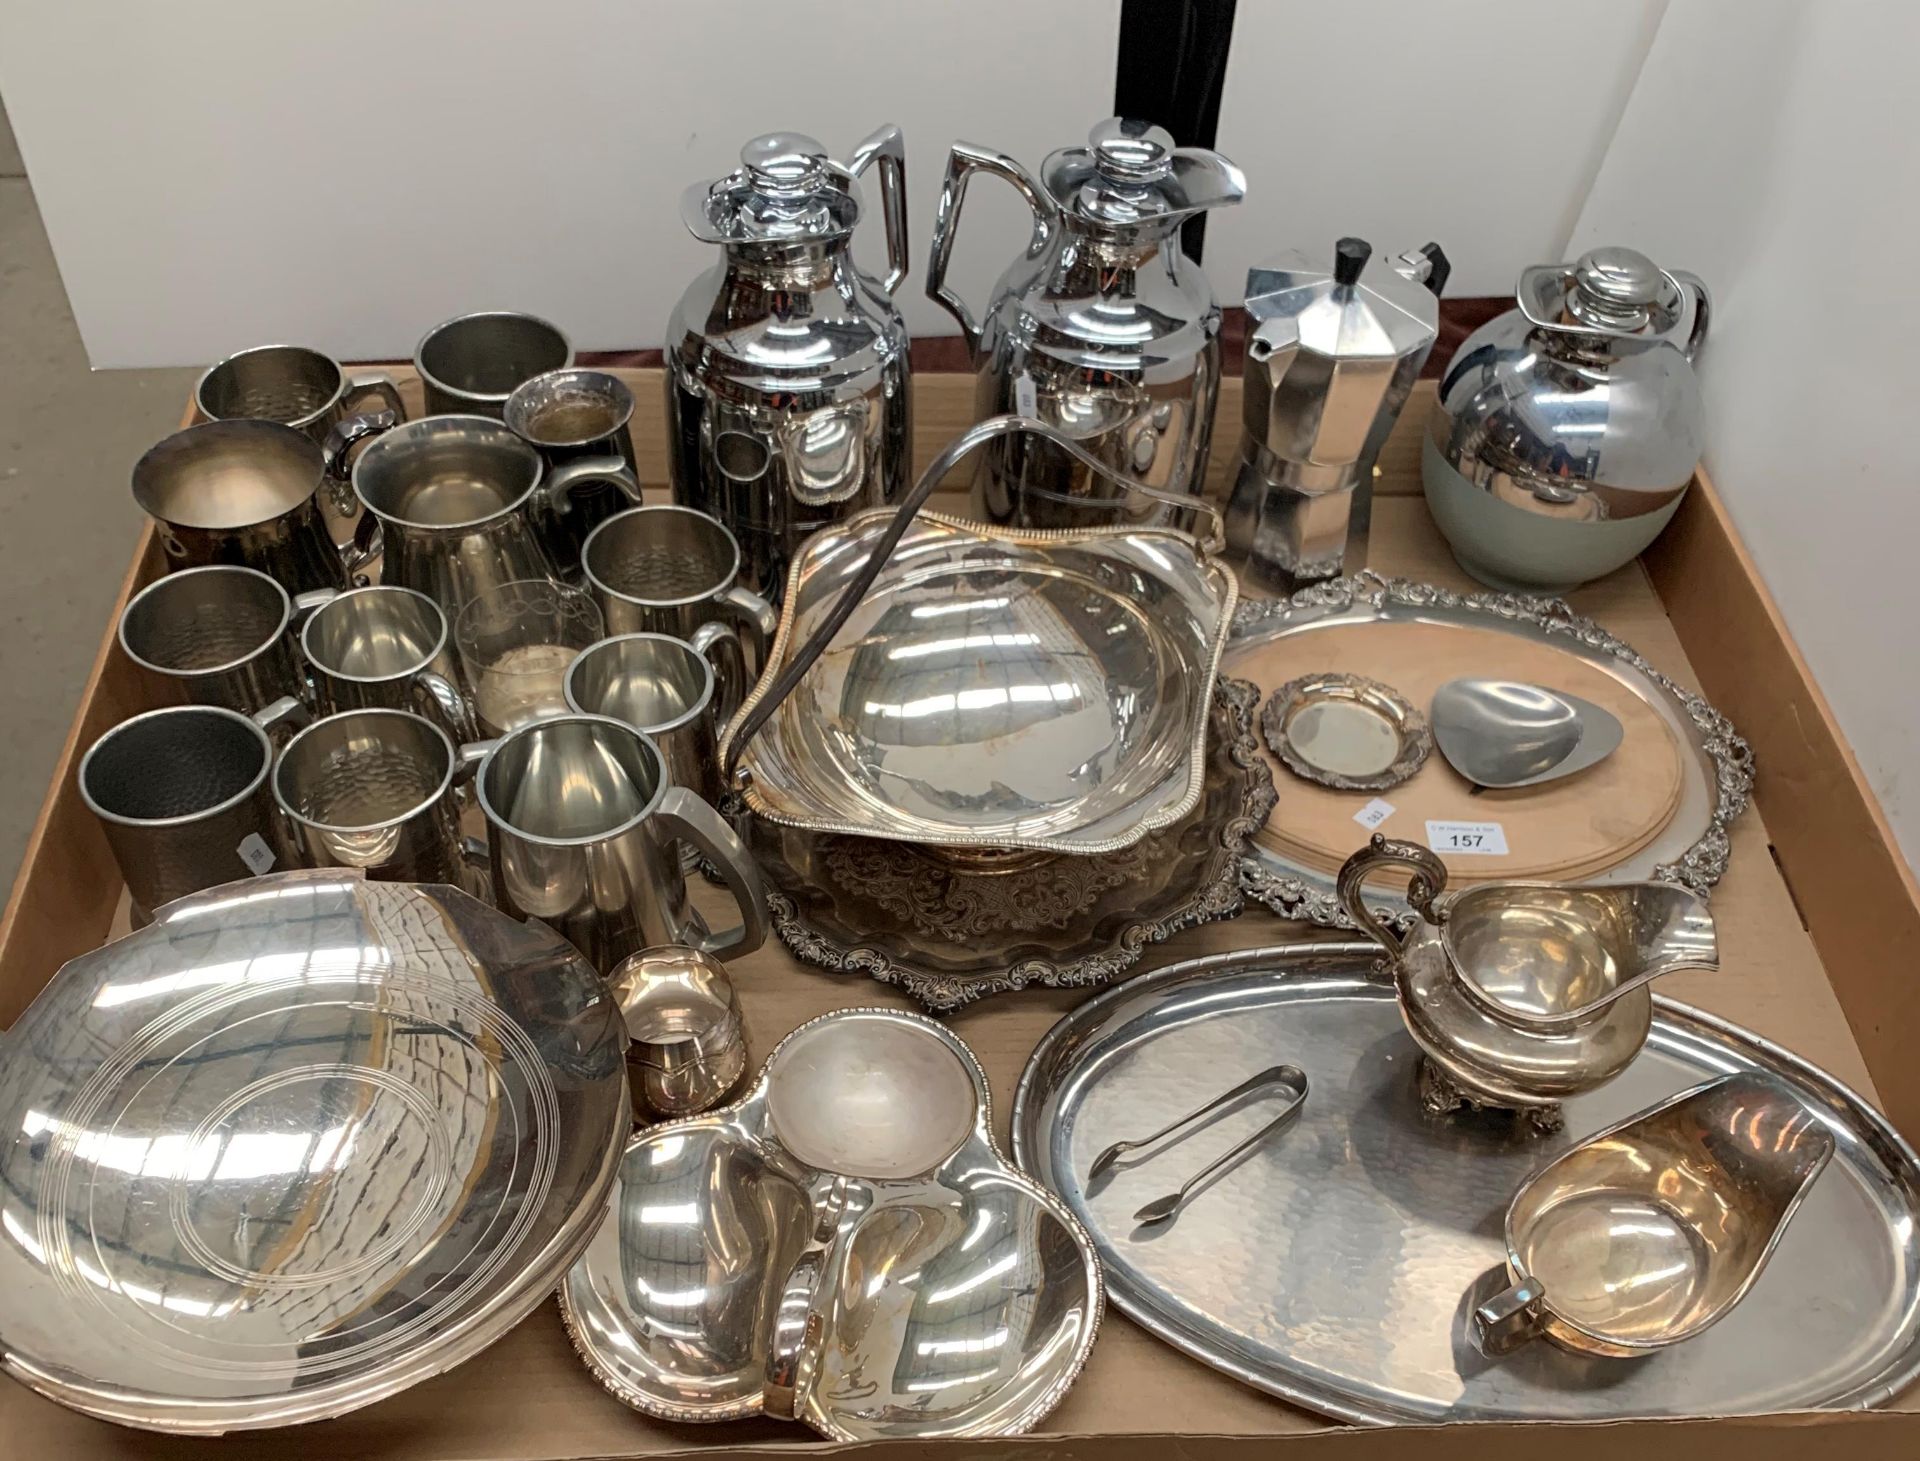 Contents to tray - a quantity of silver plated and pewter mugs, trays, dishes,